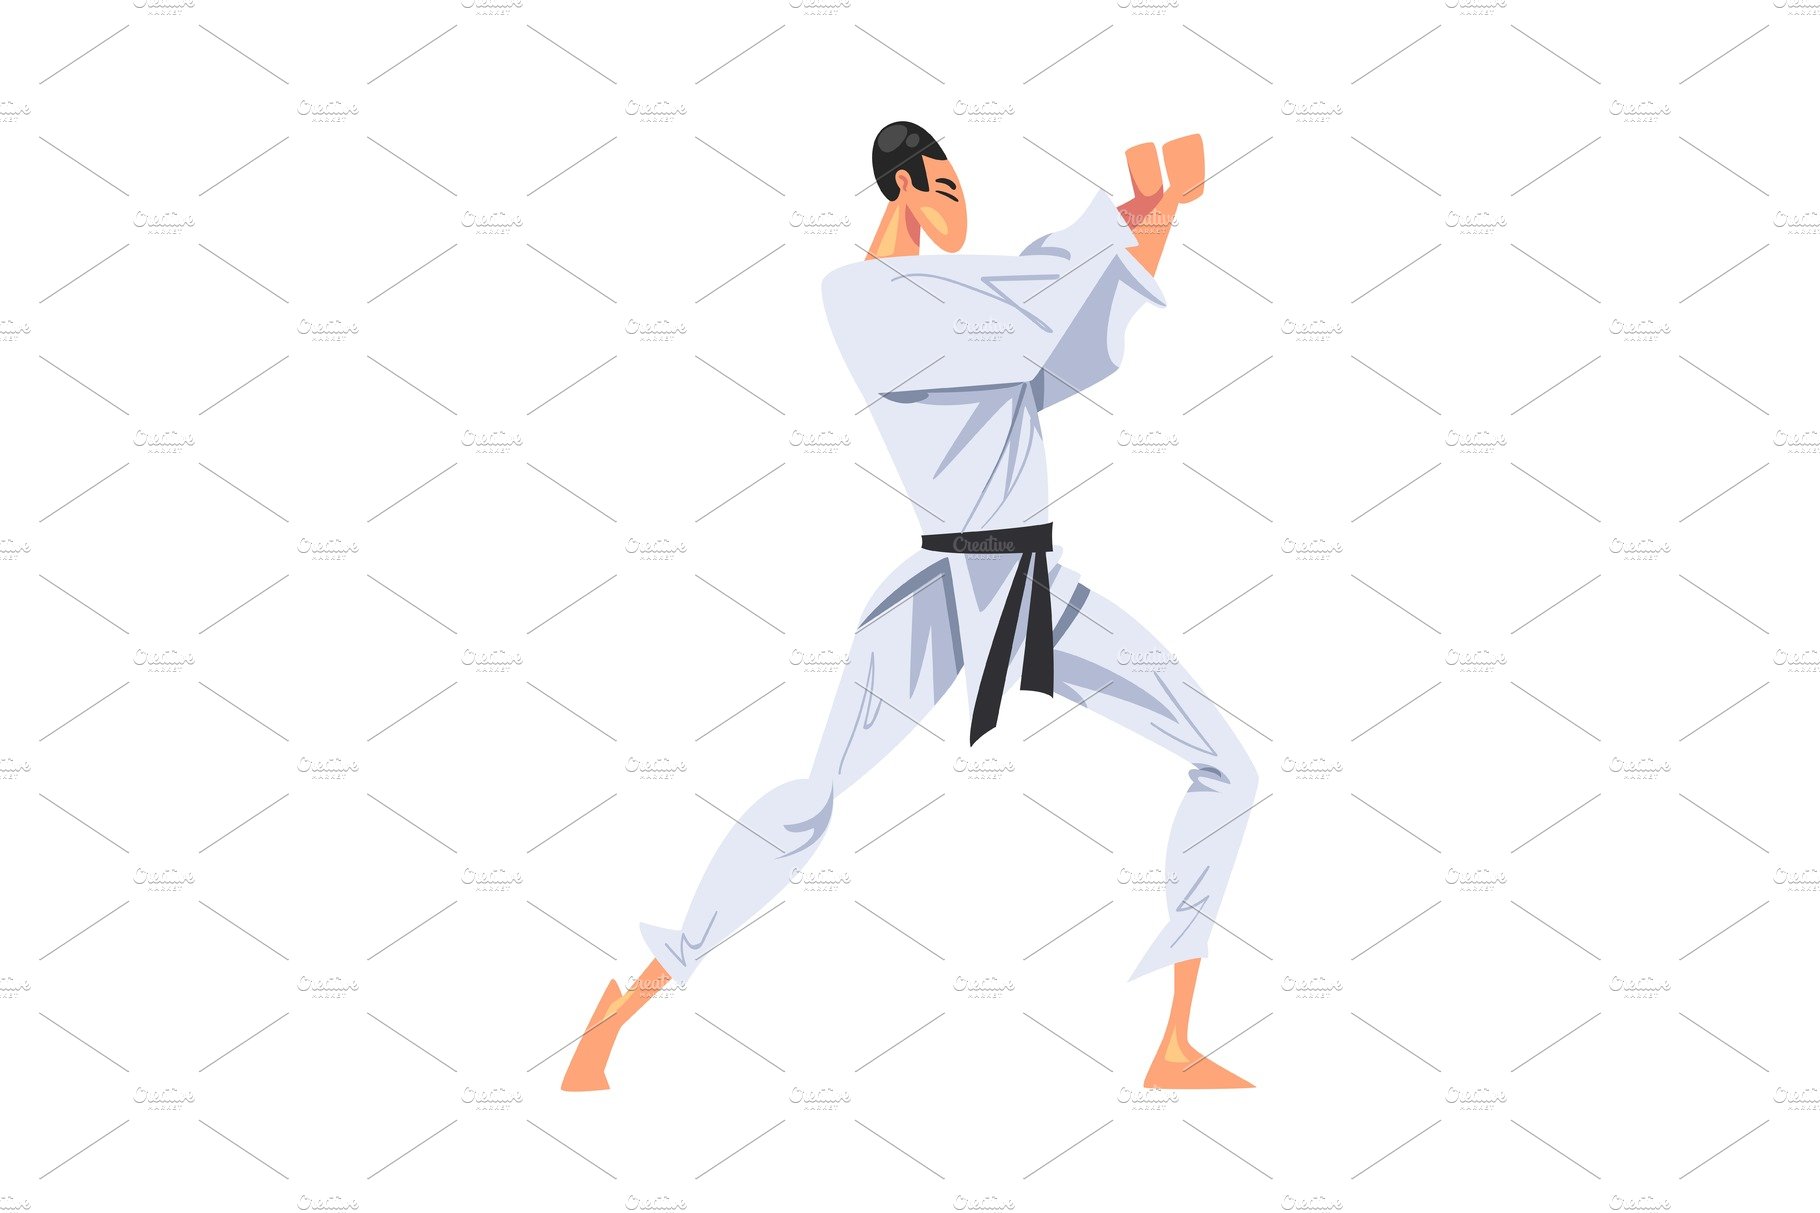 Man Karate Fighter Character in cover image.